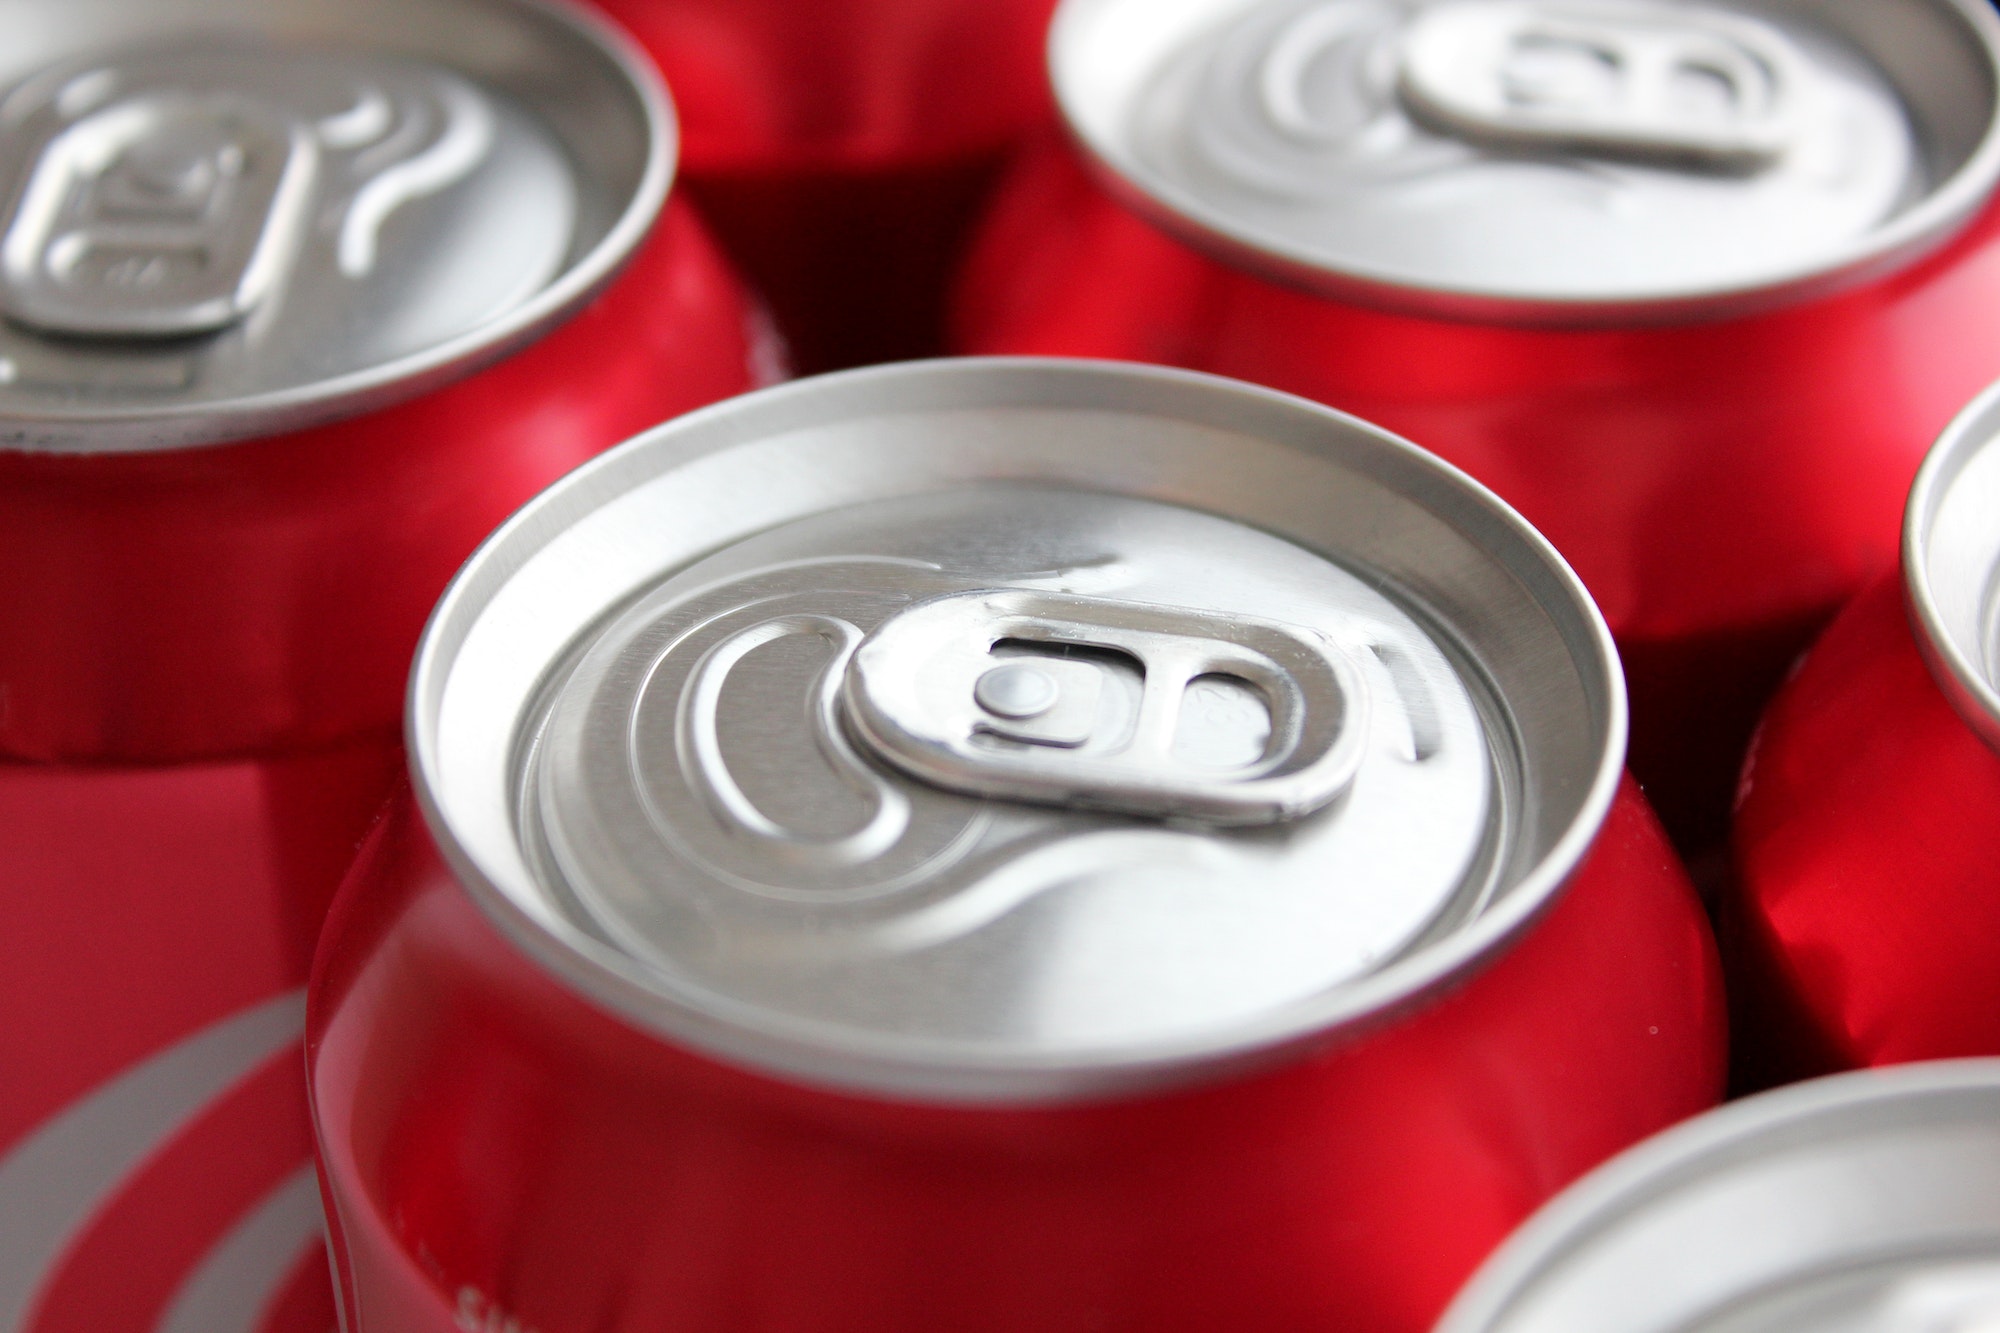 Close up of the ring pull on aluminium Coca Cola soda cans